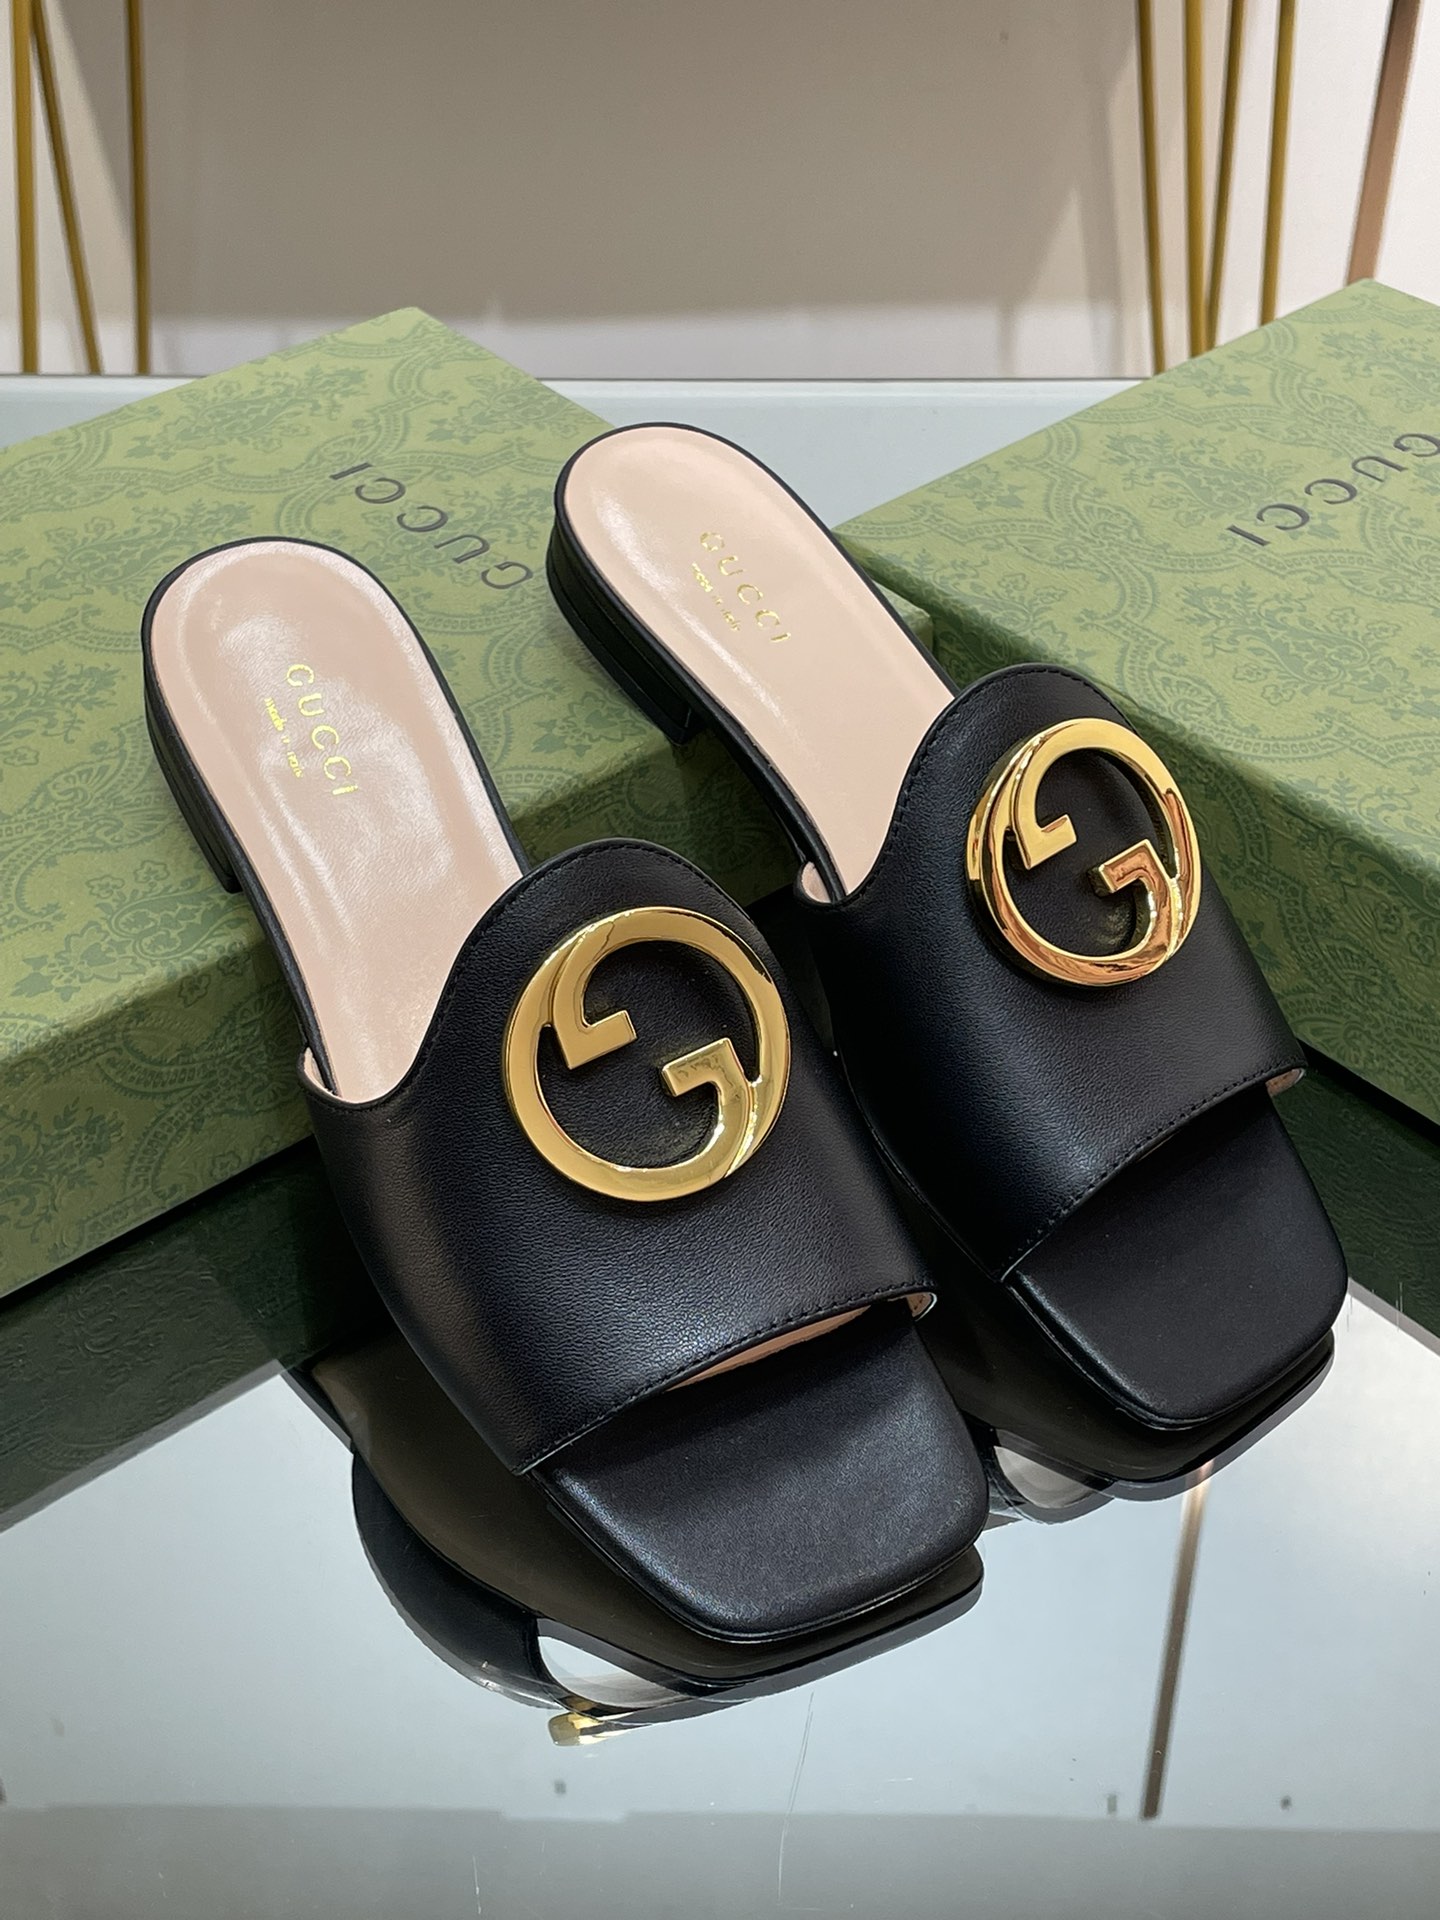 Gucci Shoes Slippers Green Genuine Leather Sheepskin Vintage